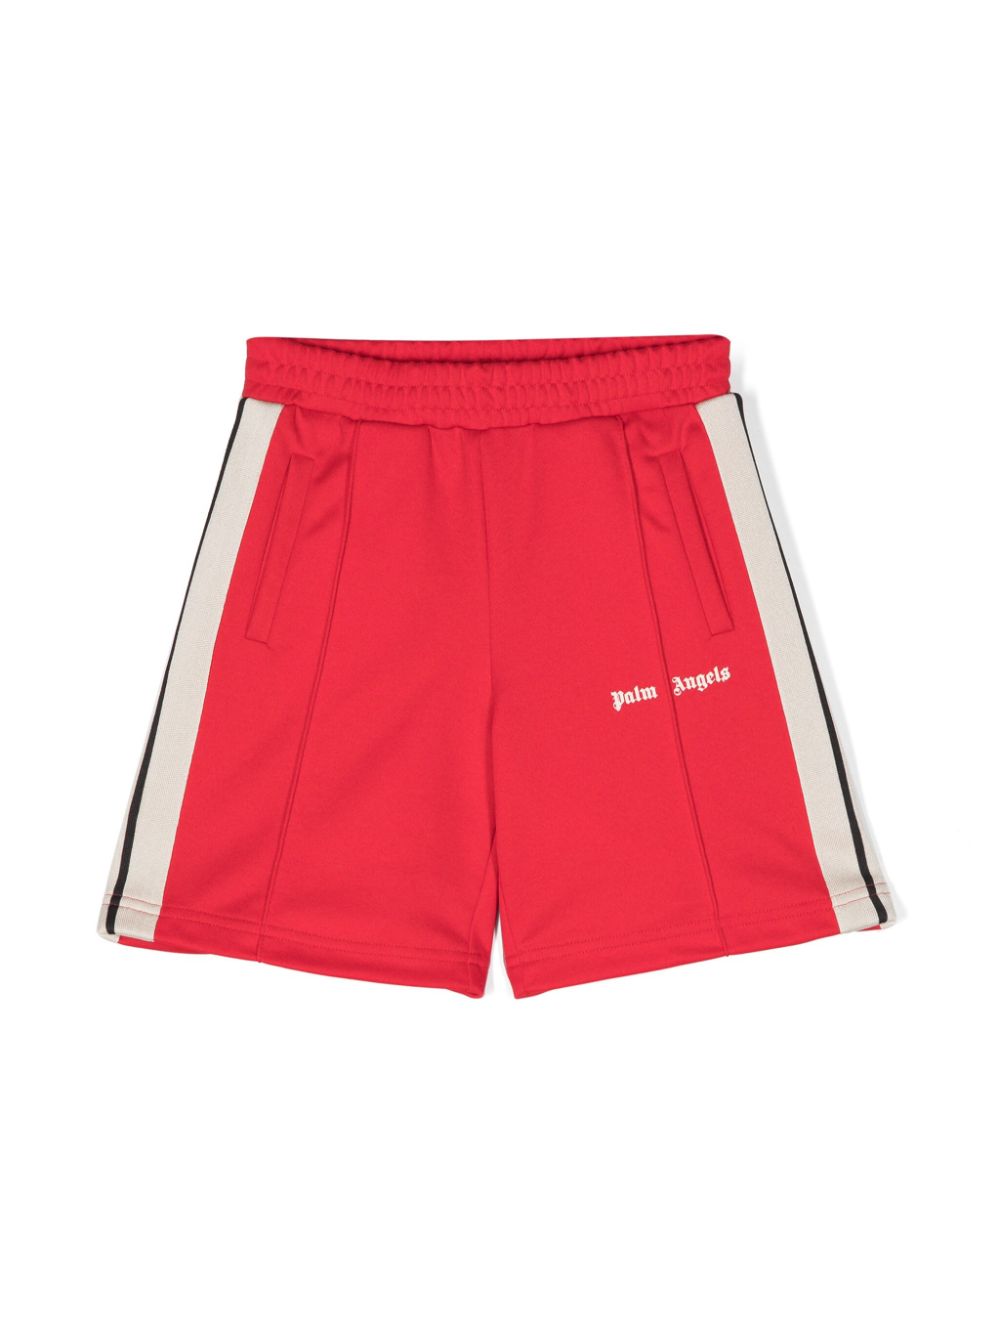 Red Bermuda shorts for boys with logo